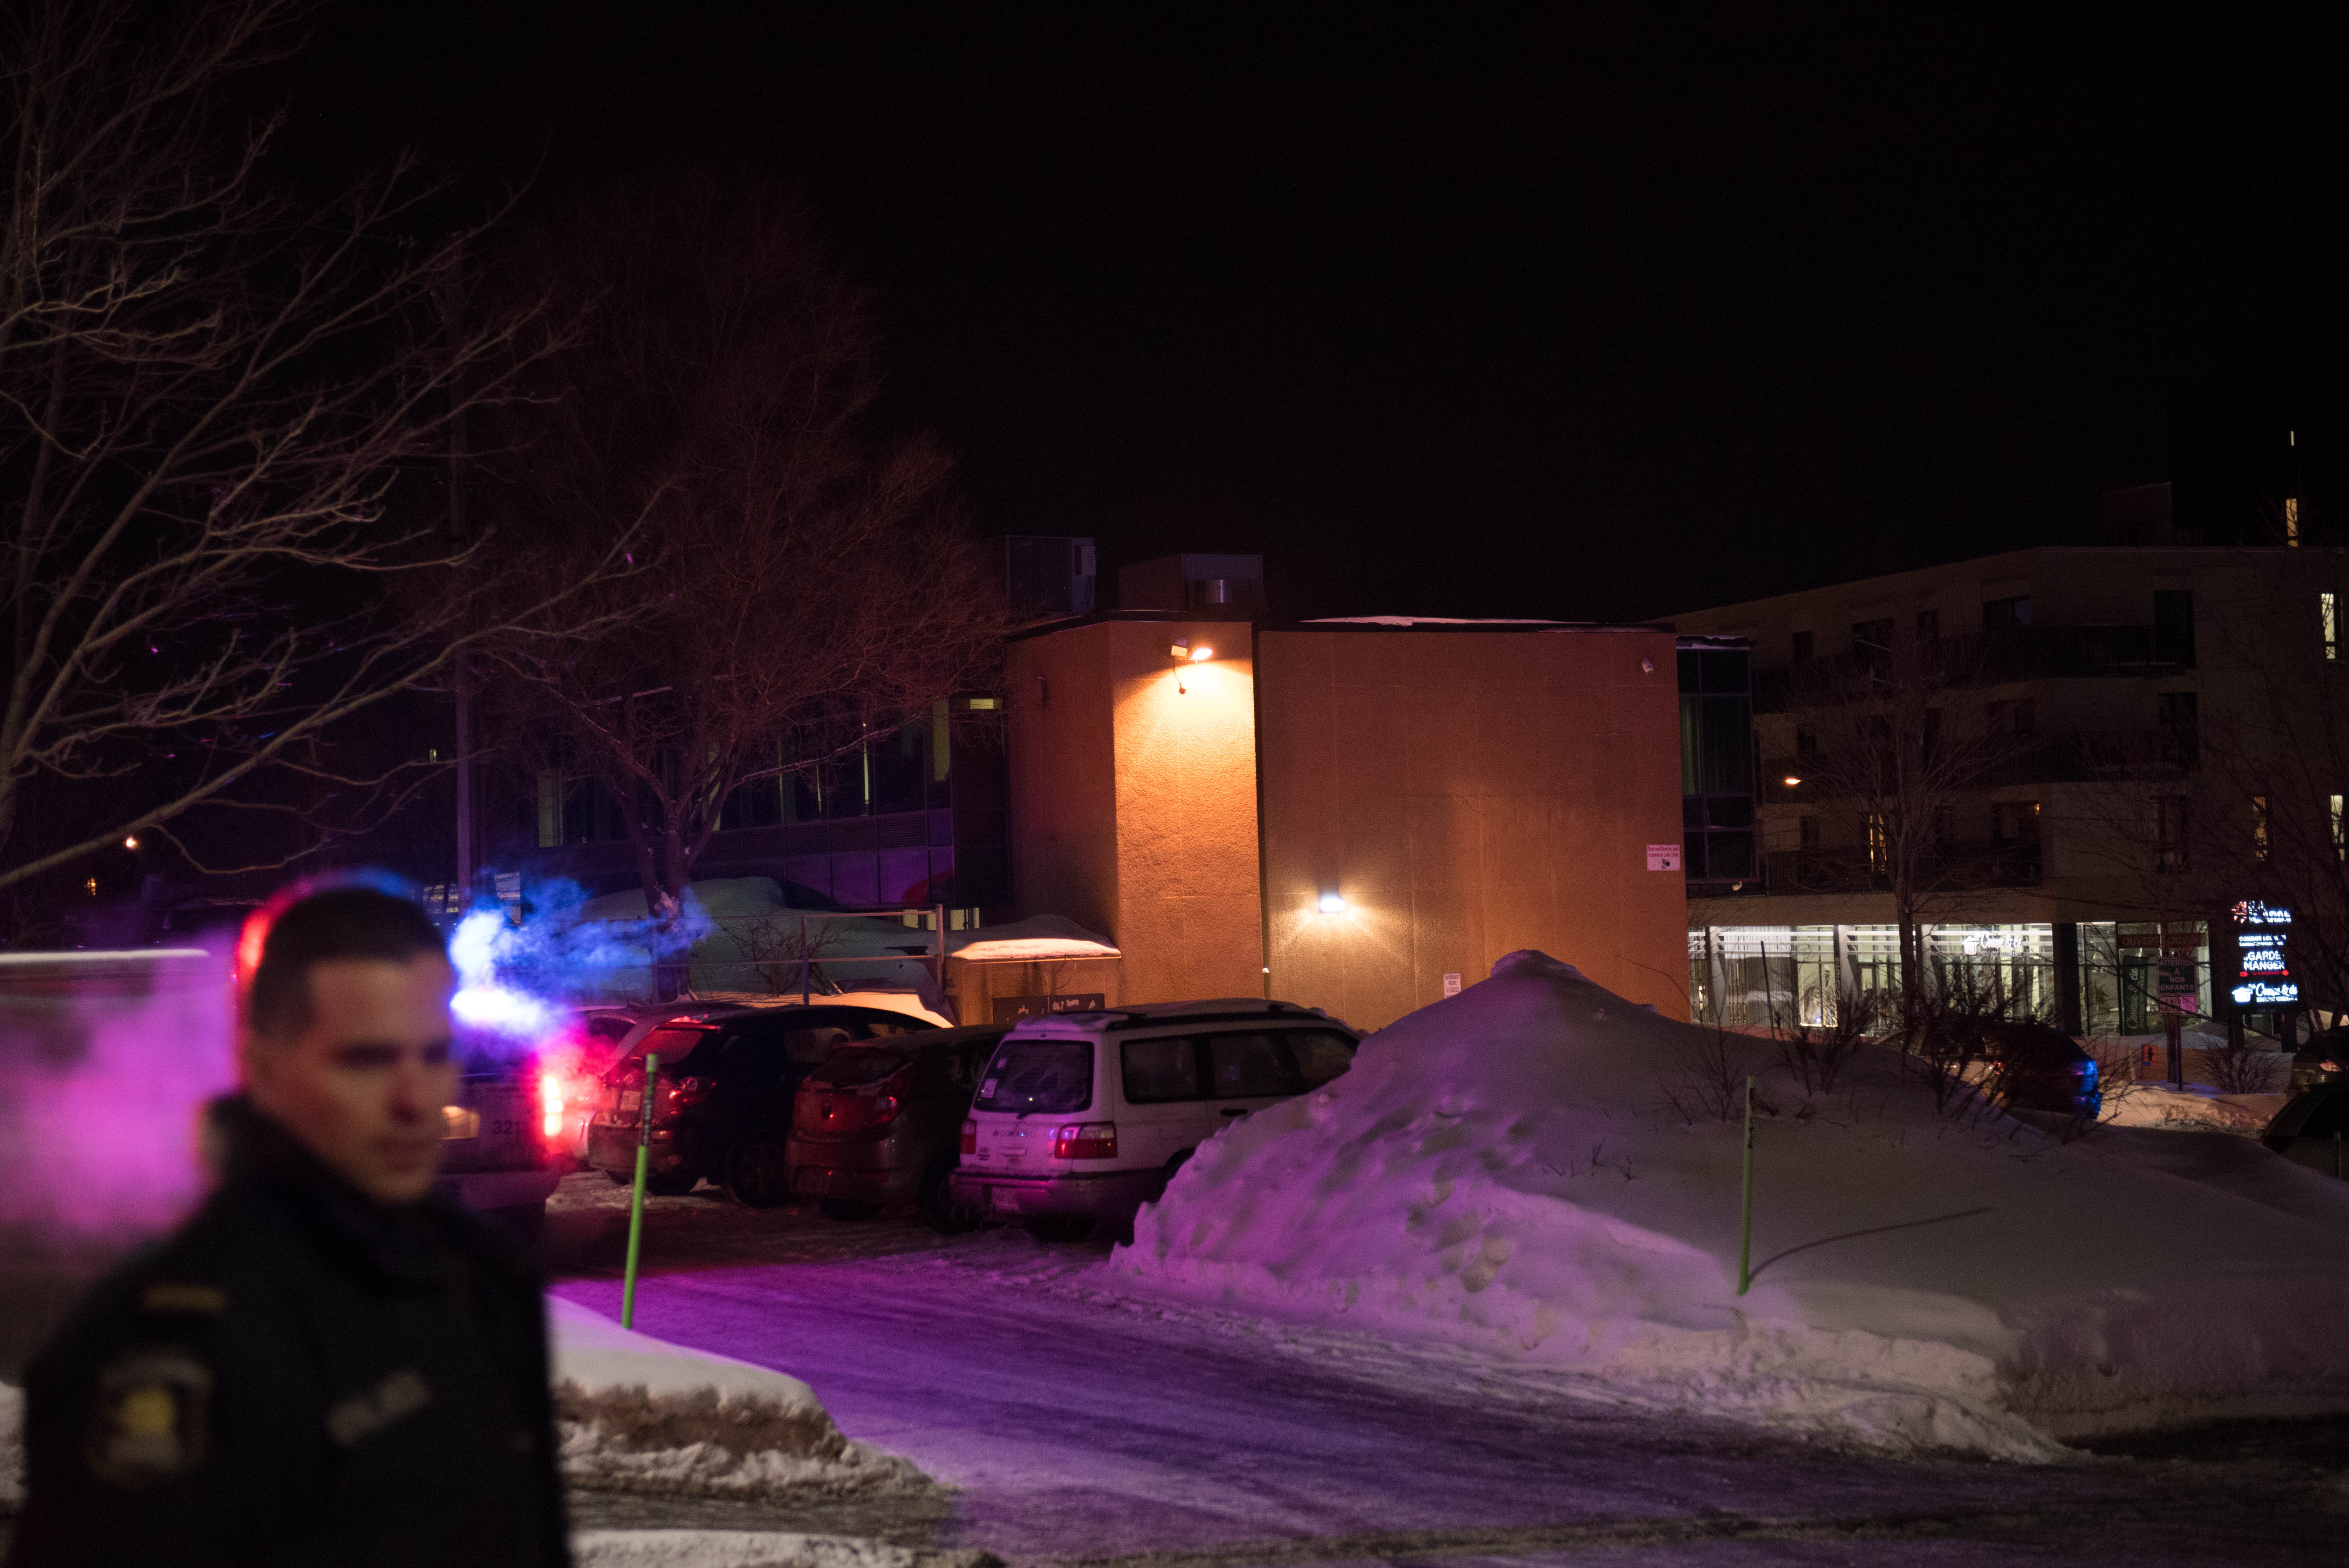 Canadian police officers respond to a shooting in a mosque at the Québec City Islamic cultural center on Sainte-Foy Street in Quebec city on January 29, 2017. (Getty)